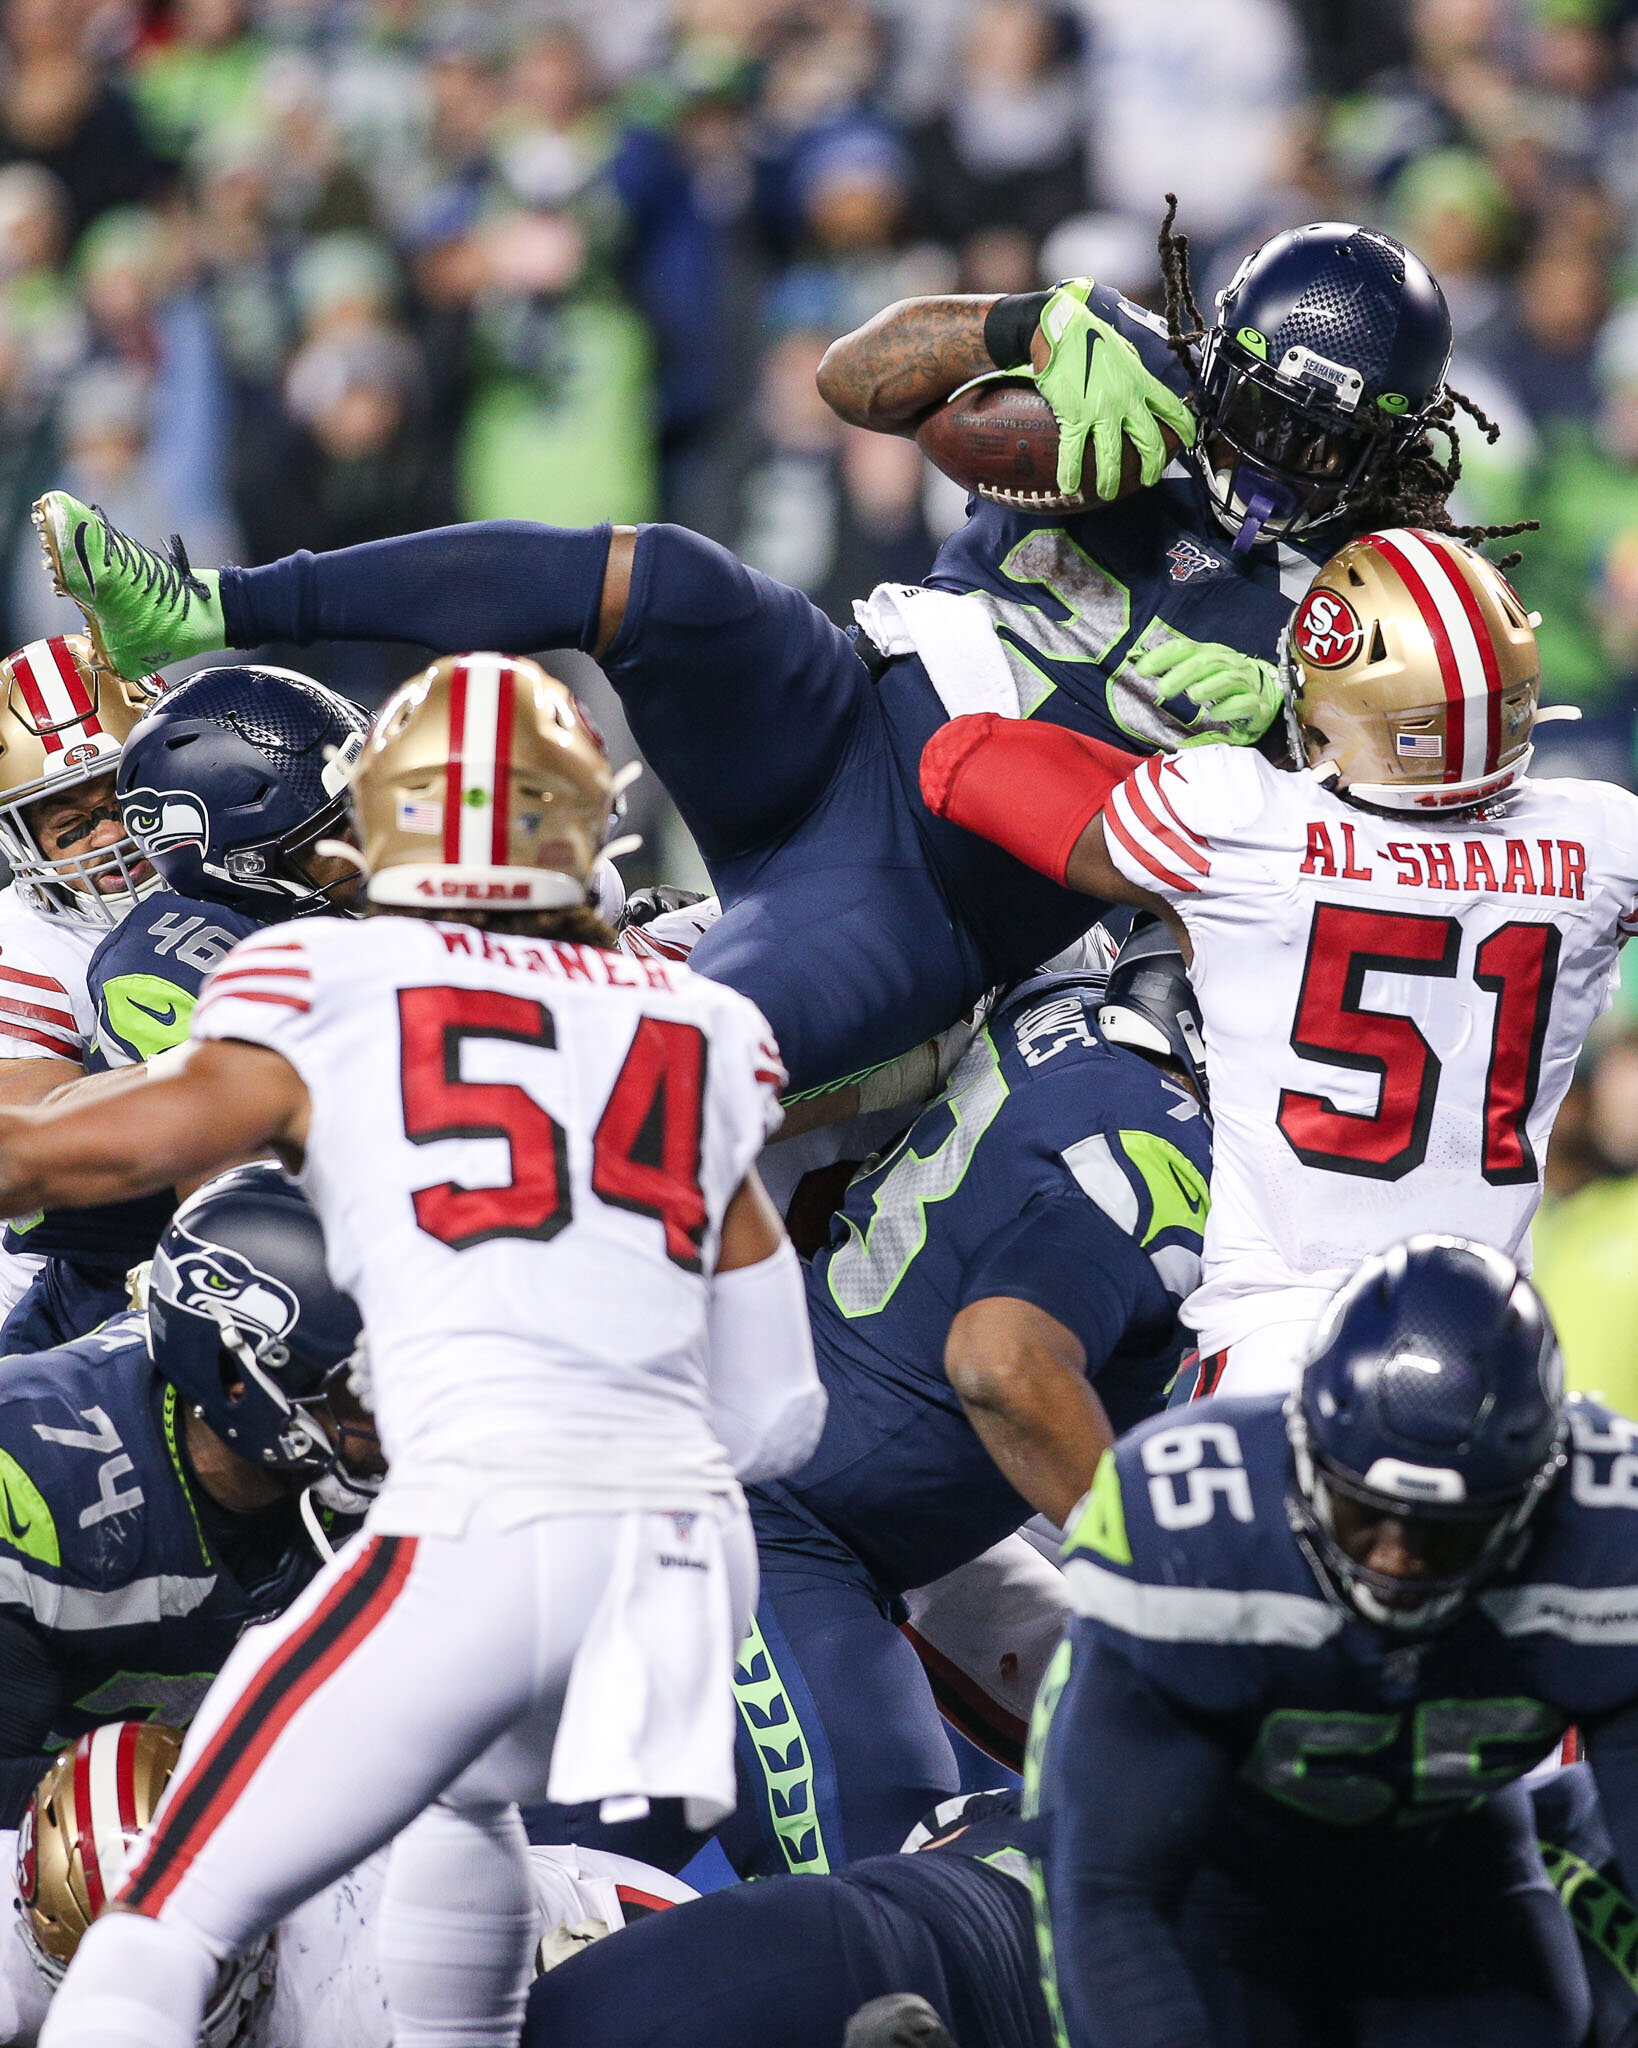  Seattle Seahawks running back Marshawn Lynch (24) dives over the pile at the line of scrimmage to score a touchdown during the fourth quarter of an NFL football game against the San Francisco 49ers, Sunday, December 29, 2019, in Seattle. The 49ers d